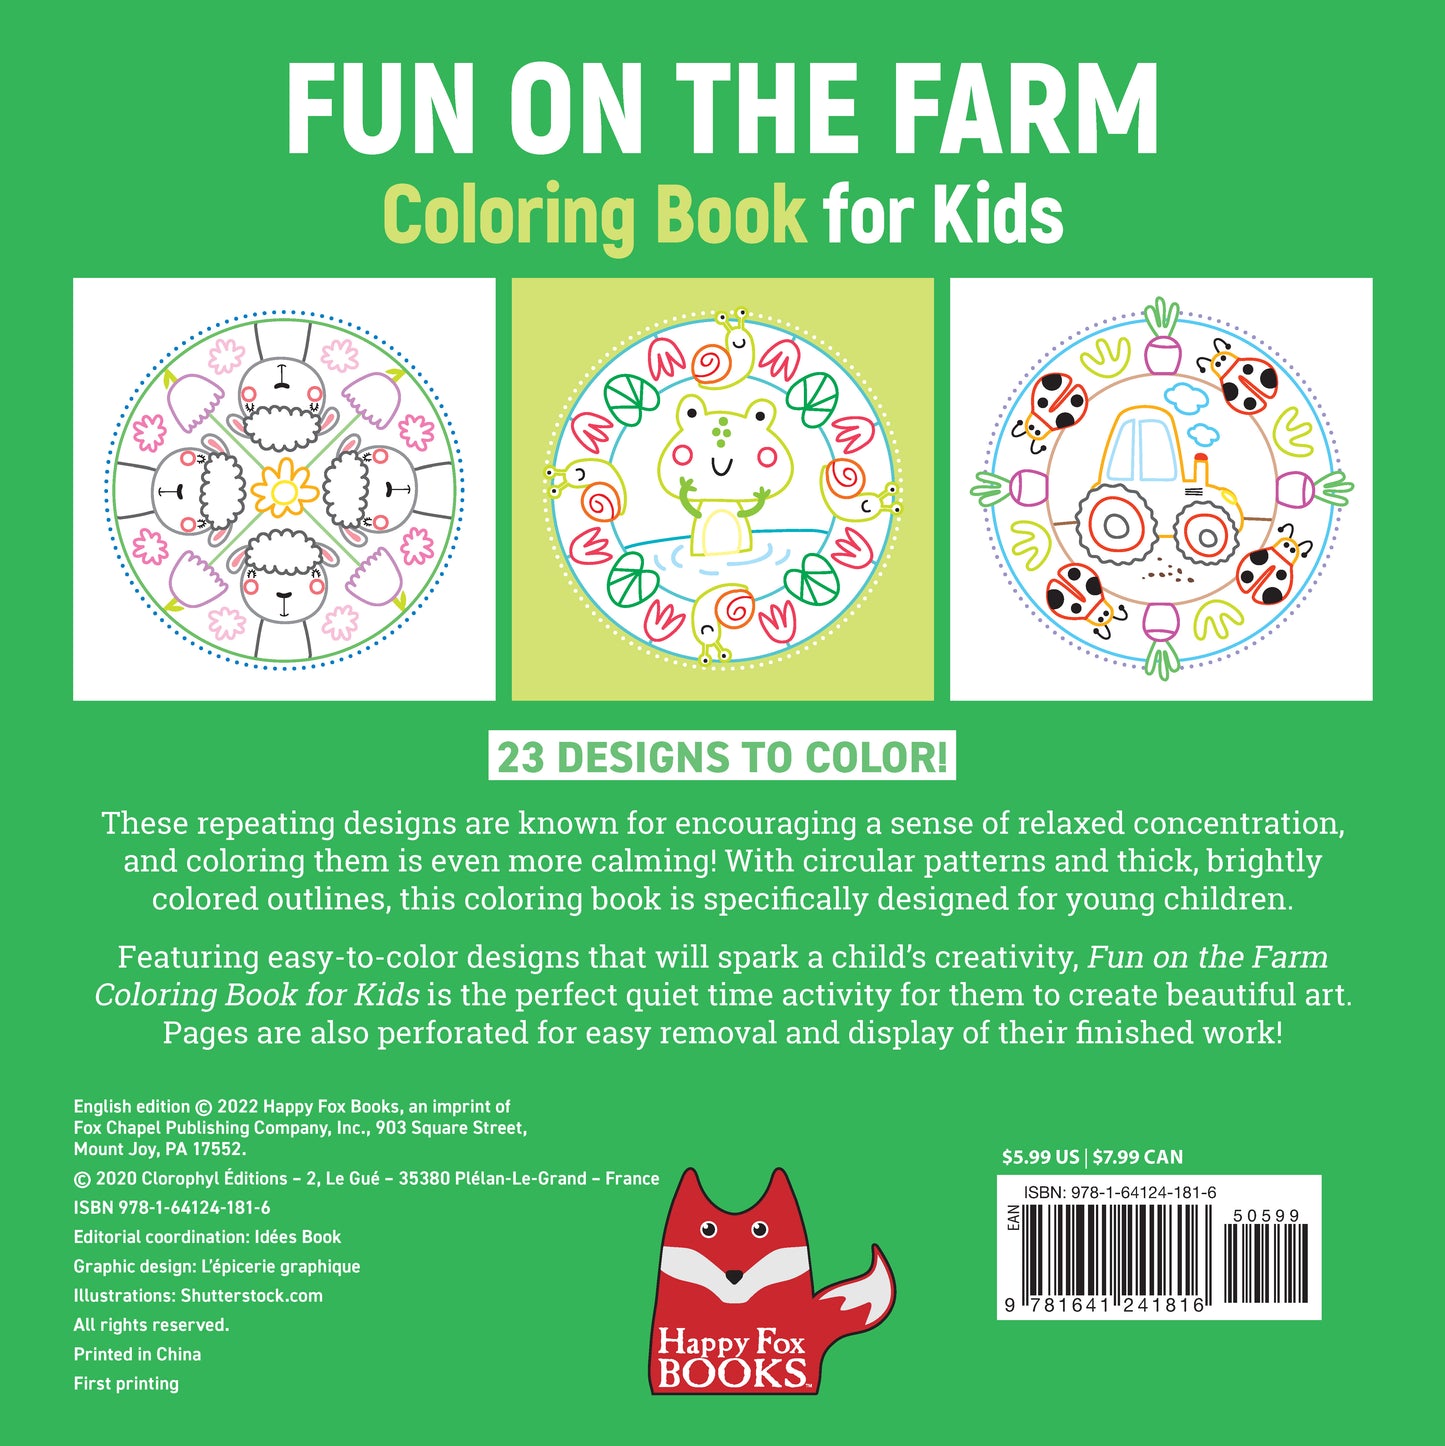 Fun on the Farm Coloring Book for Kids